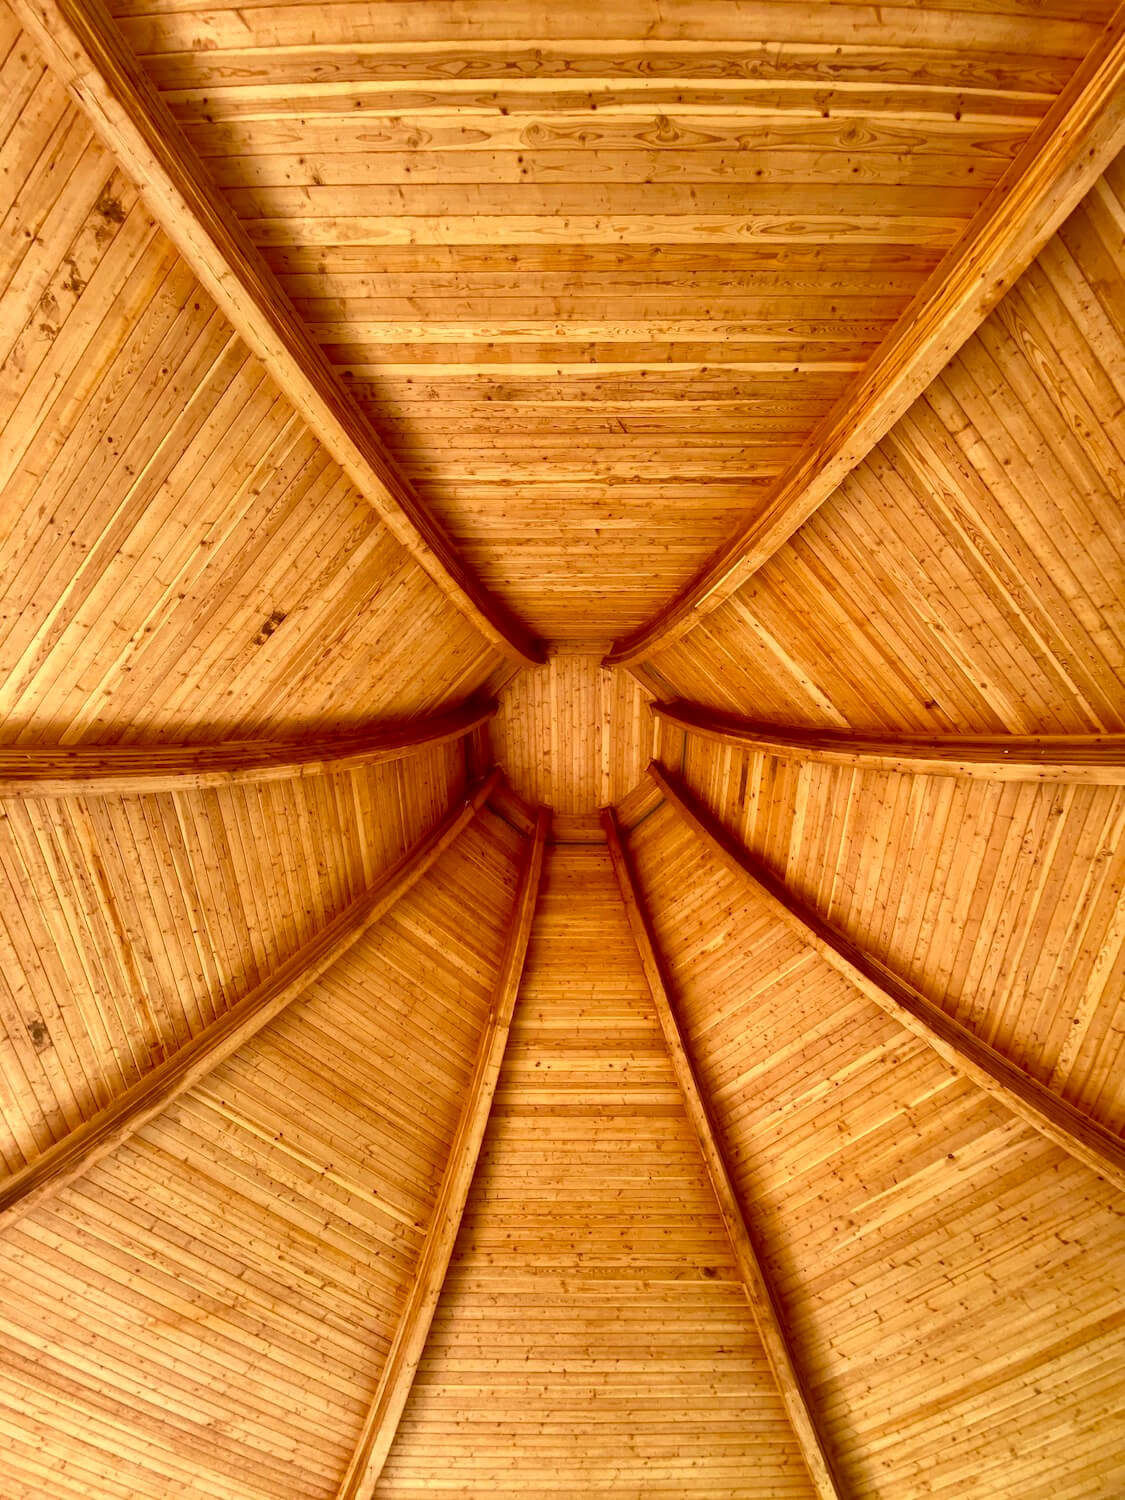 This inside of a pavilion made to resemble a traditional cedar hat worn by the Swinomish Tribe.  The cedar planks are an orangish glow and bend up to the ceiling, which has an octagon shaped cap.  